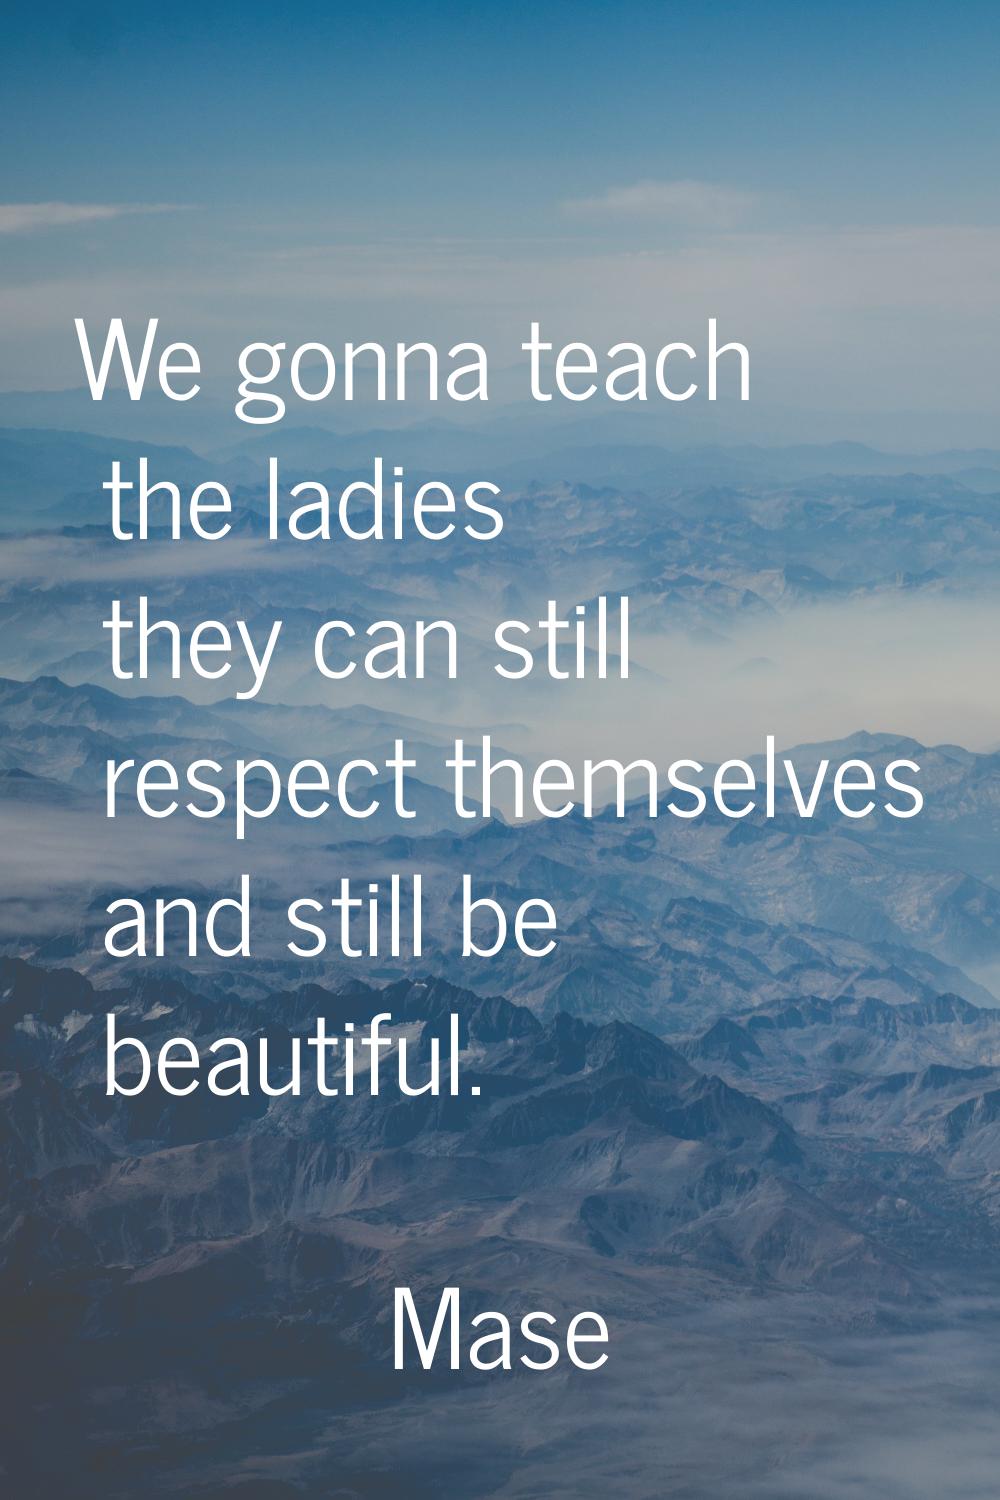 We gonna teach the ladies they can still respect themselves and still be beautiful.